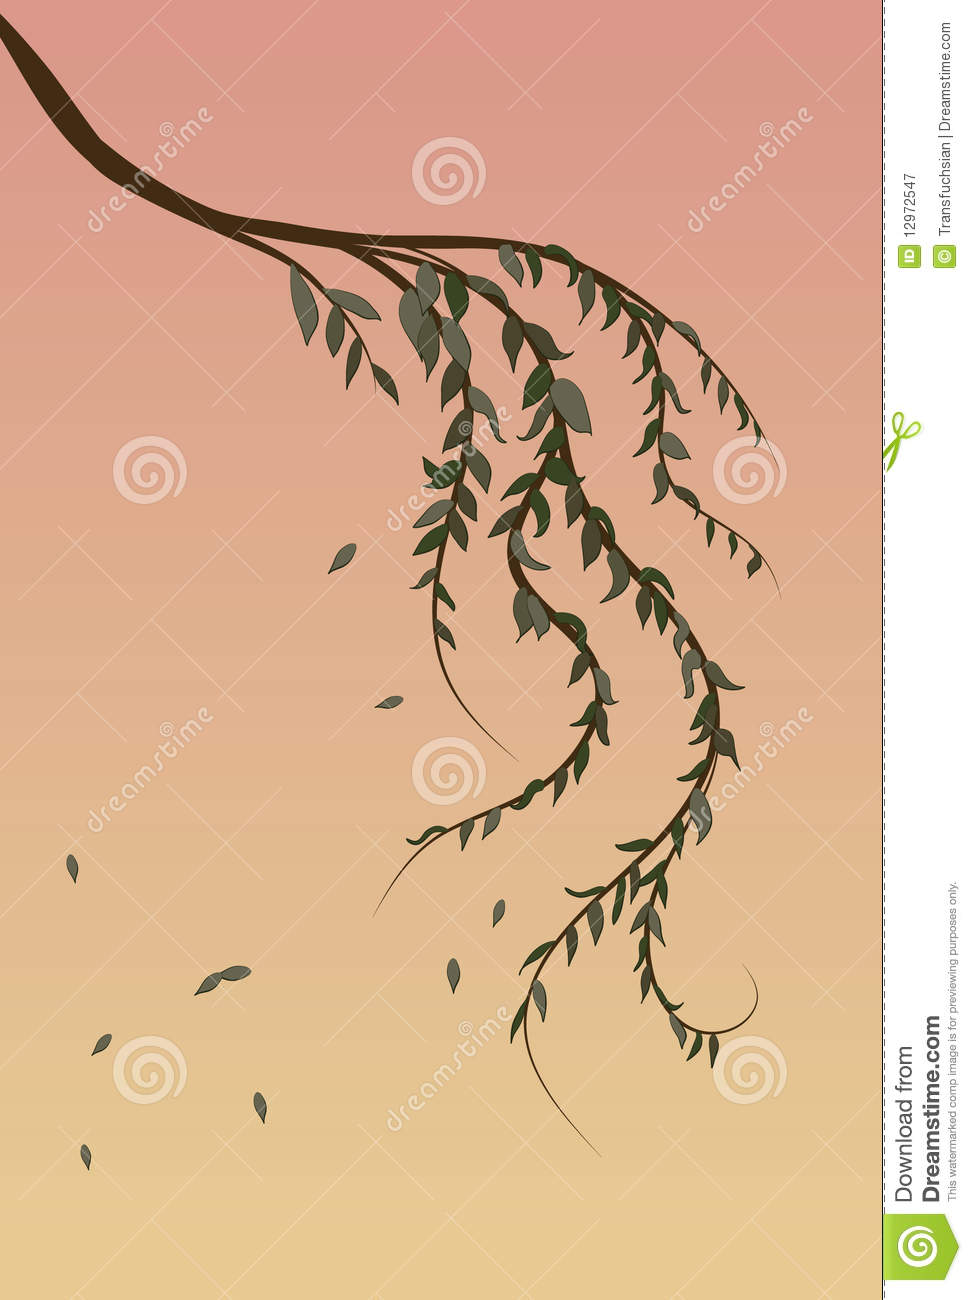 Weeping Willow Tree Branch Background Royalty Free Stock Photography